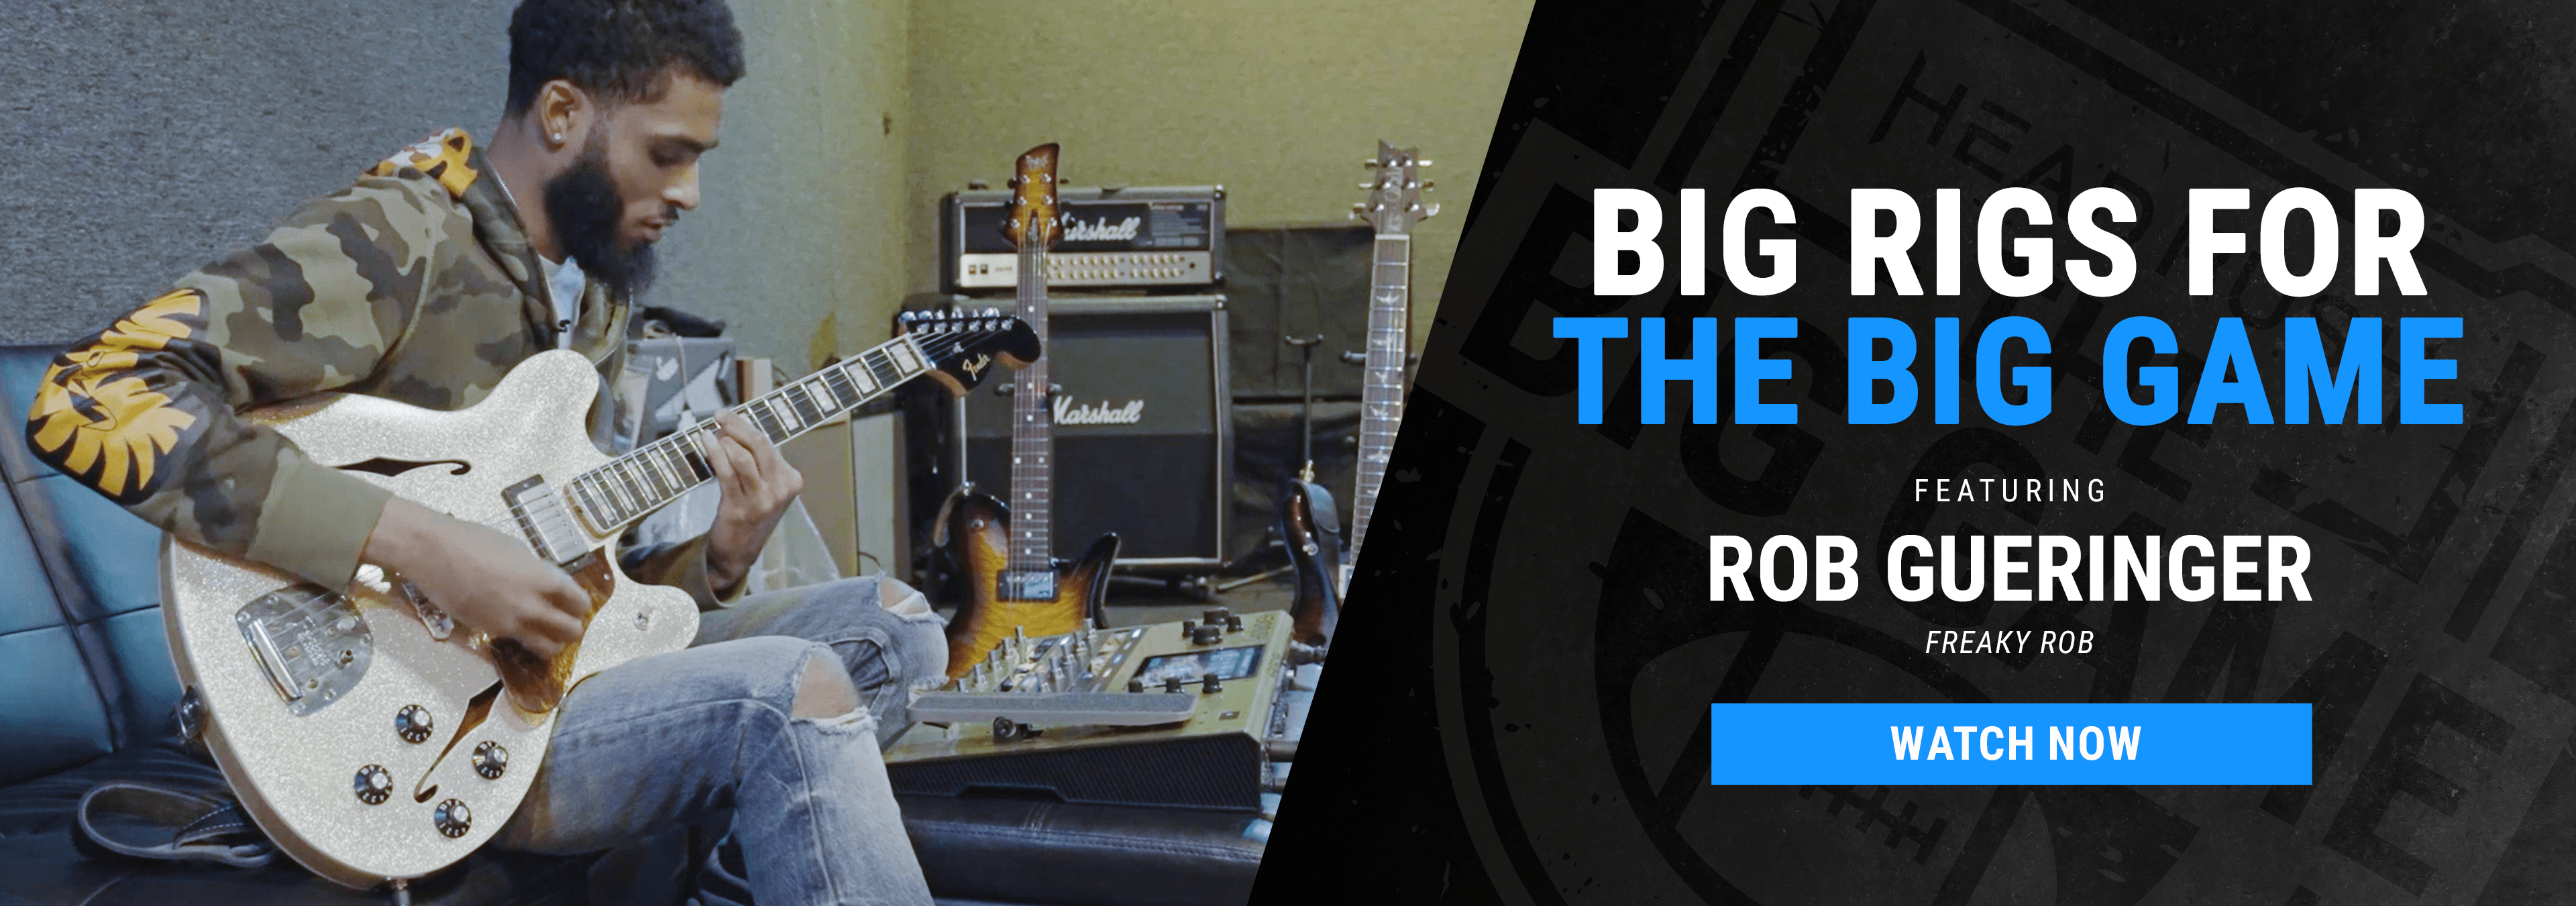 HeadRush Presents Rob Gueringer (Freaky Rob) | Big Rig for the Big Game